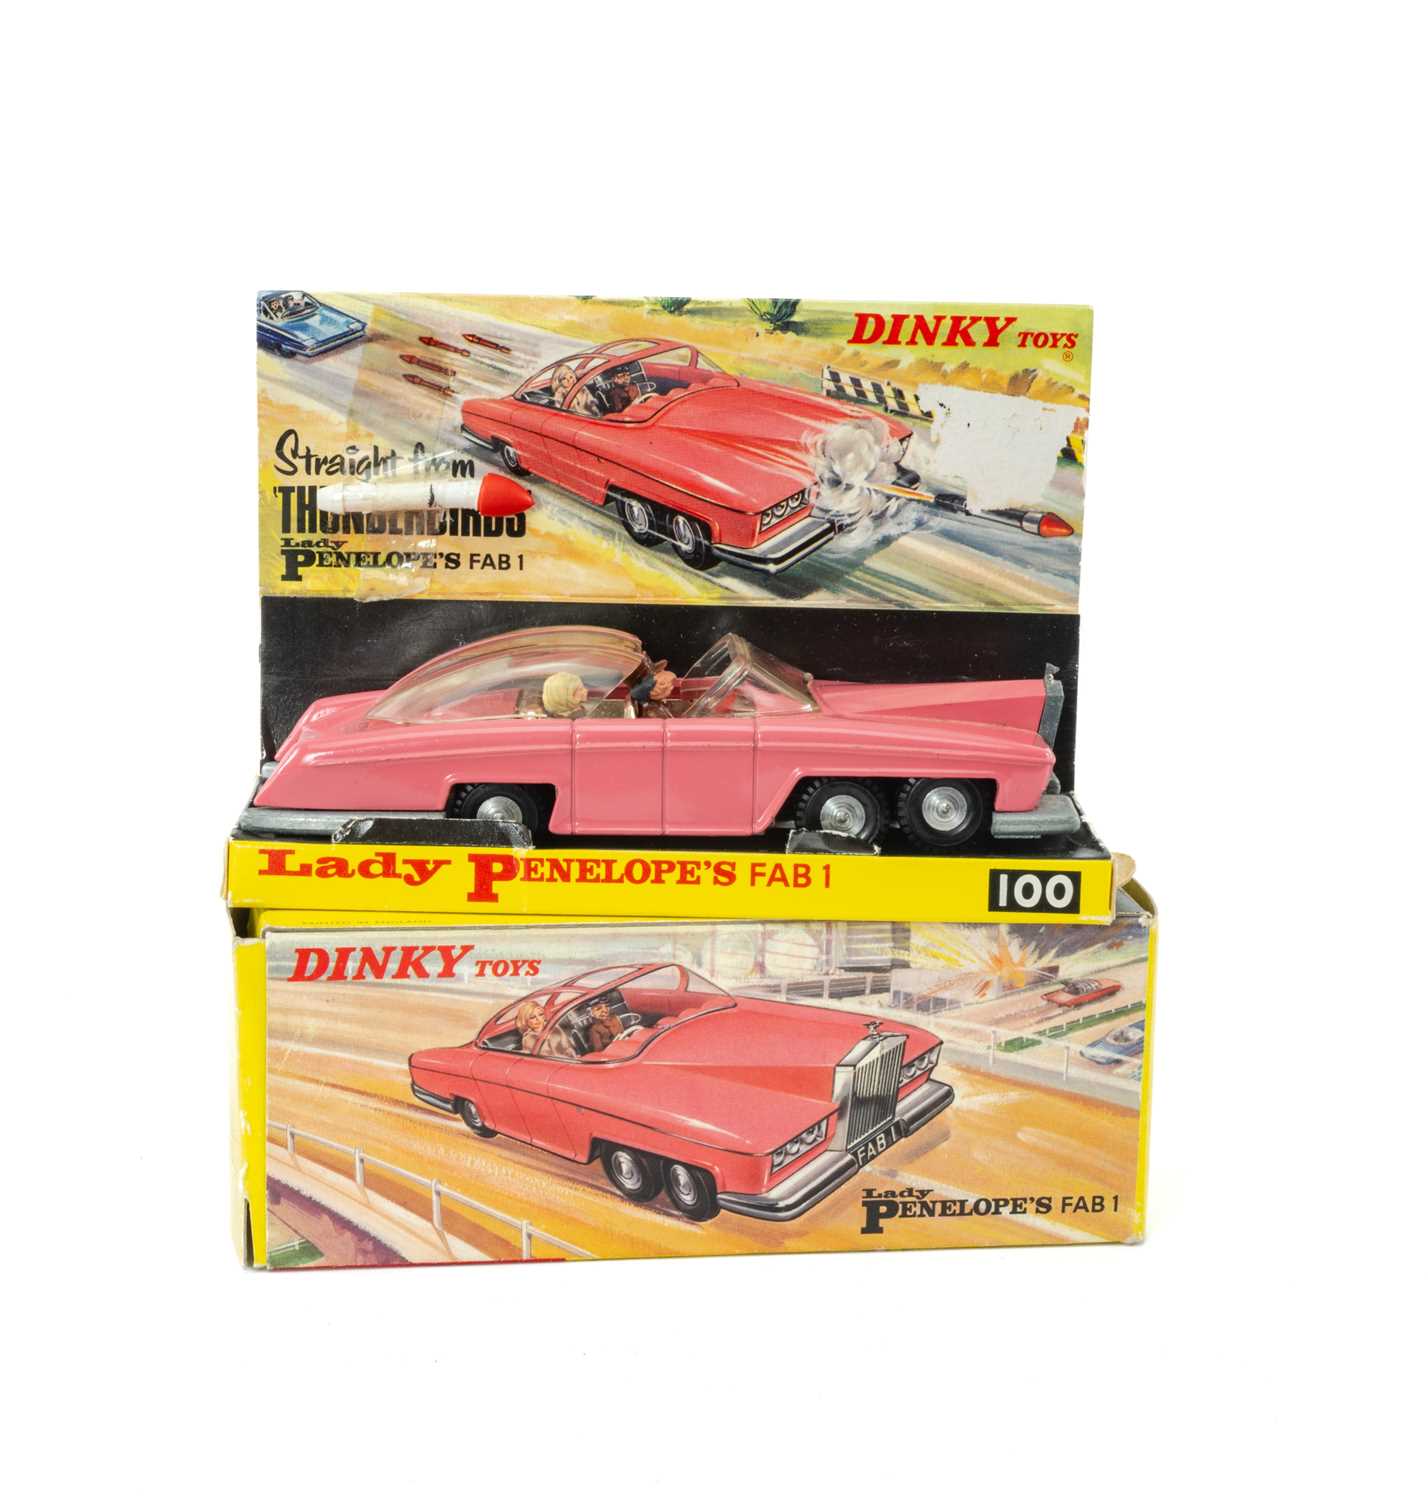 A BOXED DINKY TOYS THUNDERBIRDS 'LADY PENELOPE'S FAB 1' No. 100 pink six-wheeled Rolls-Royce with